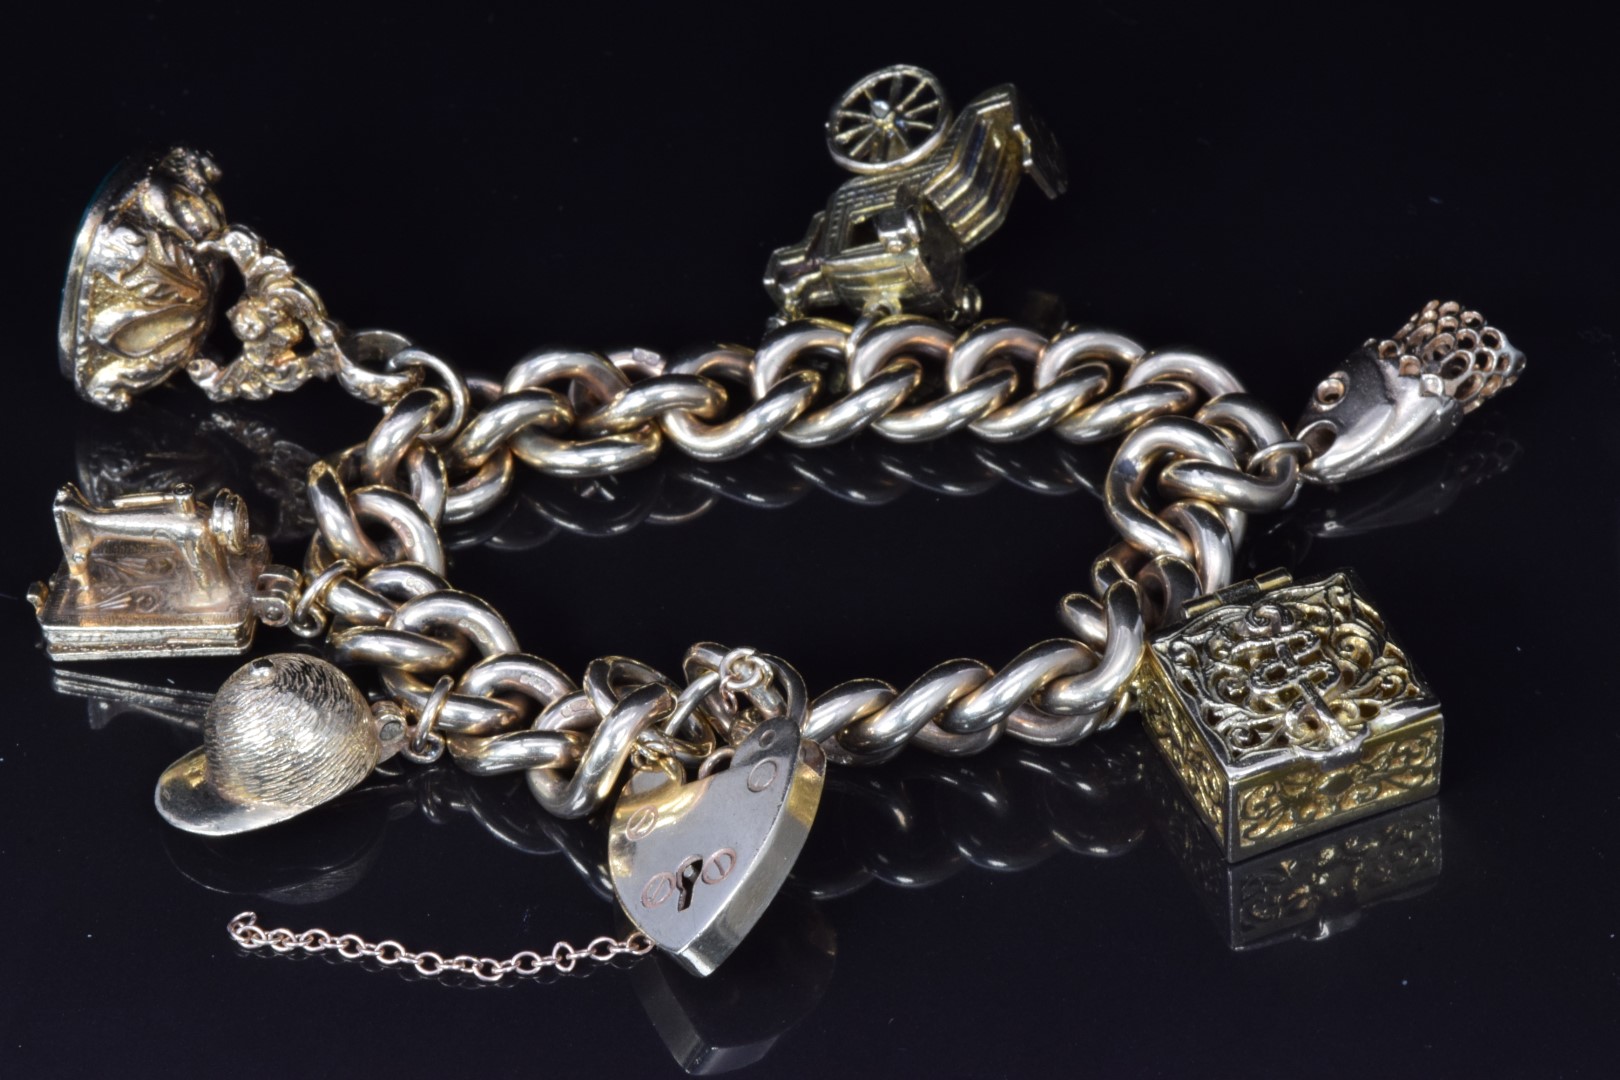 A 9ct gold charm bracelet with five 9ct gold charms including sewing machine, fob, jockey's hat